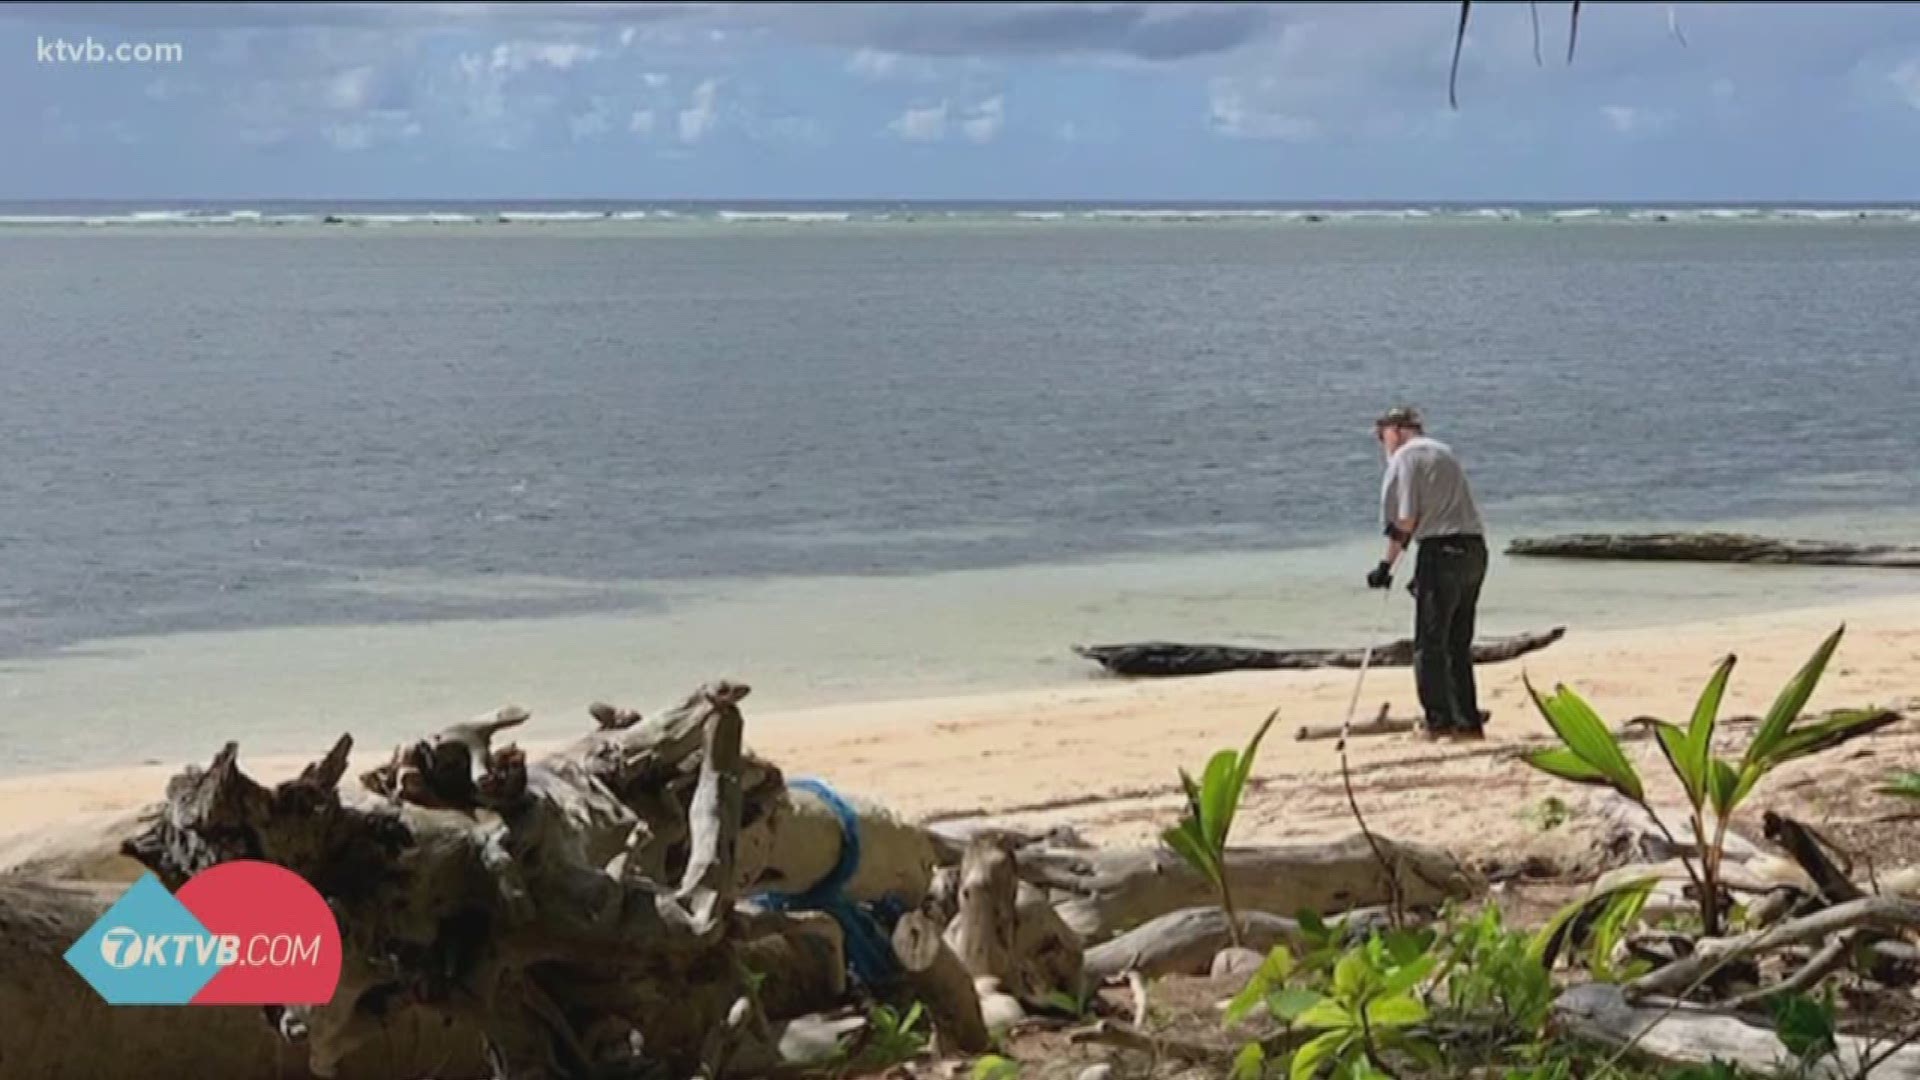 For 75 Years I Tried To Forget Canyon County Veteran Returns To Palau Islands Decades After World War Ii Battle Ktvb Com - beach walk roblox id